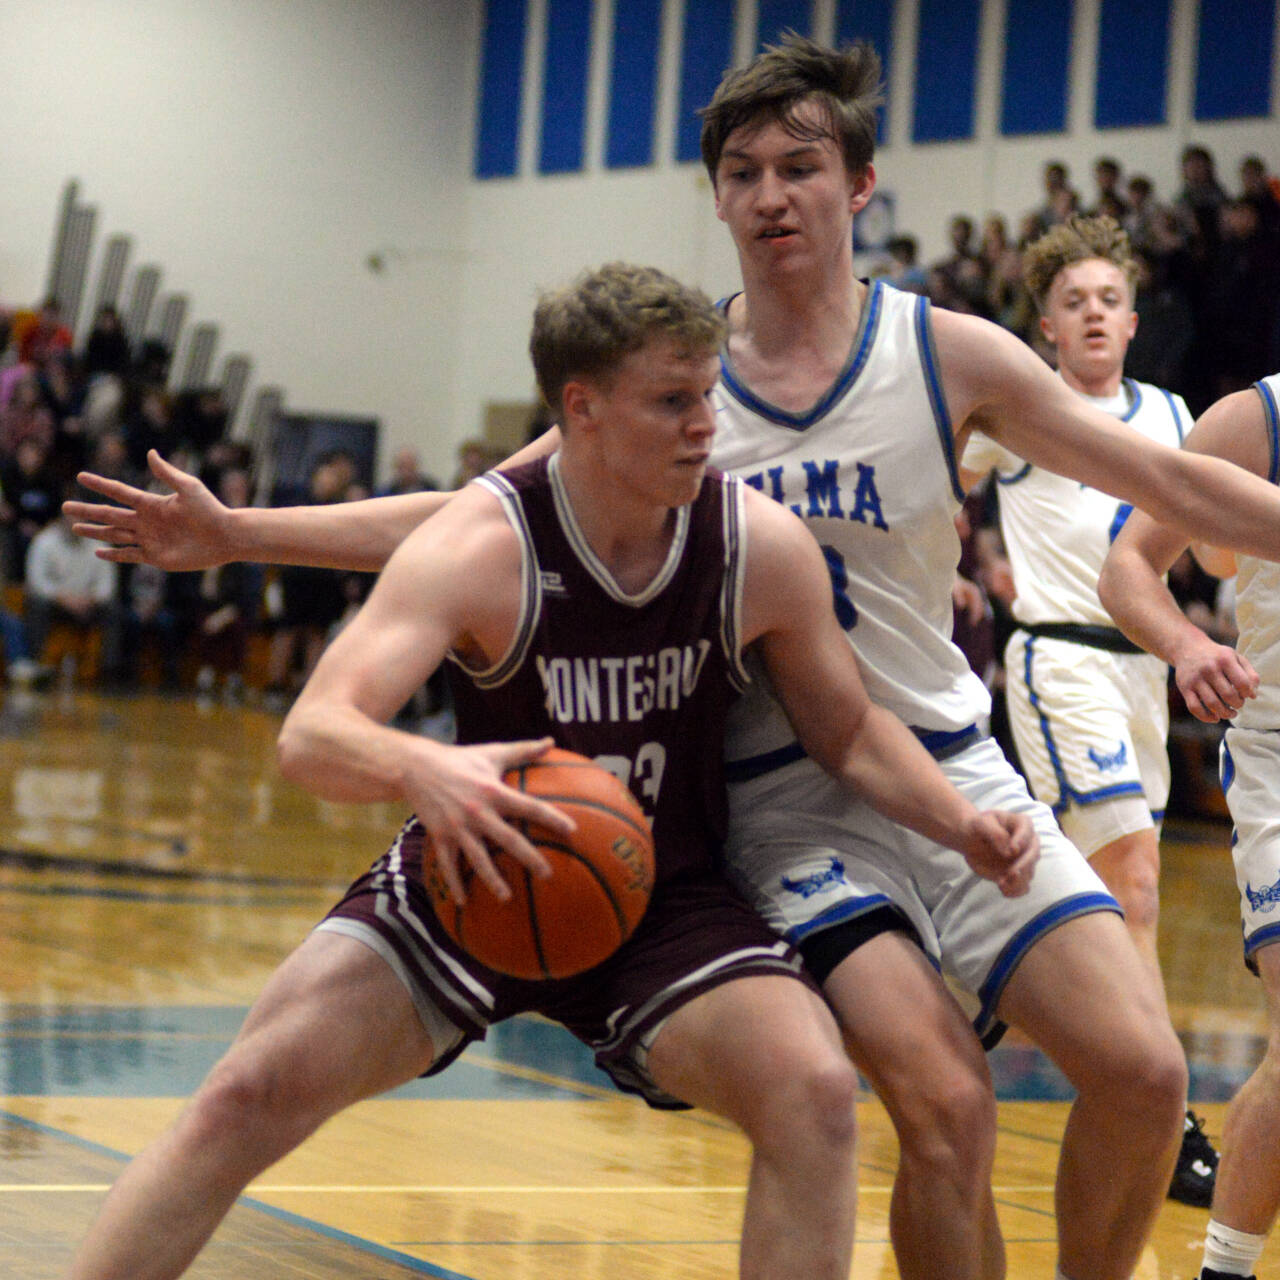 RYAN SPARKS | THE DAILY WORLD Montesano’s Tyce Peterson, left, dribbles against Elma’s AJ Holmes during Monte’s 69-59 win on Friday in Elma.